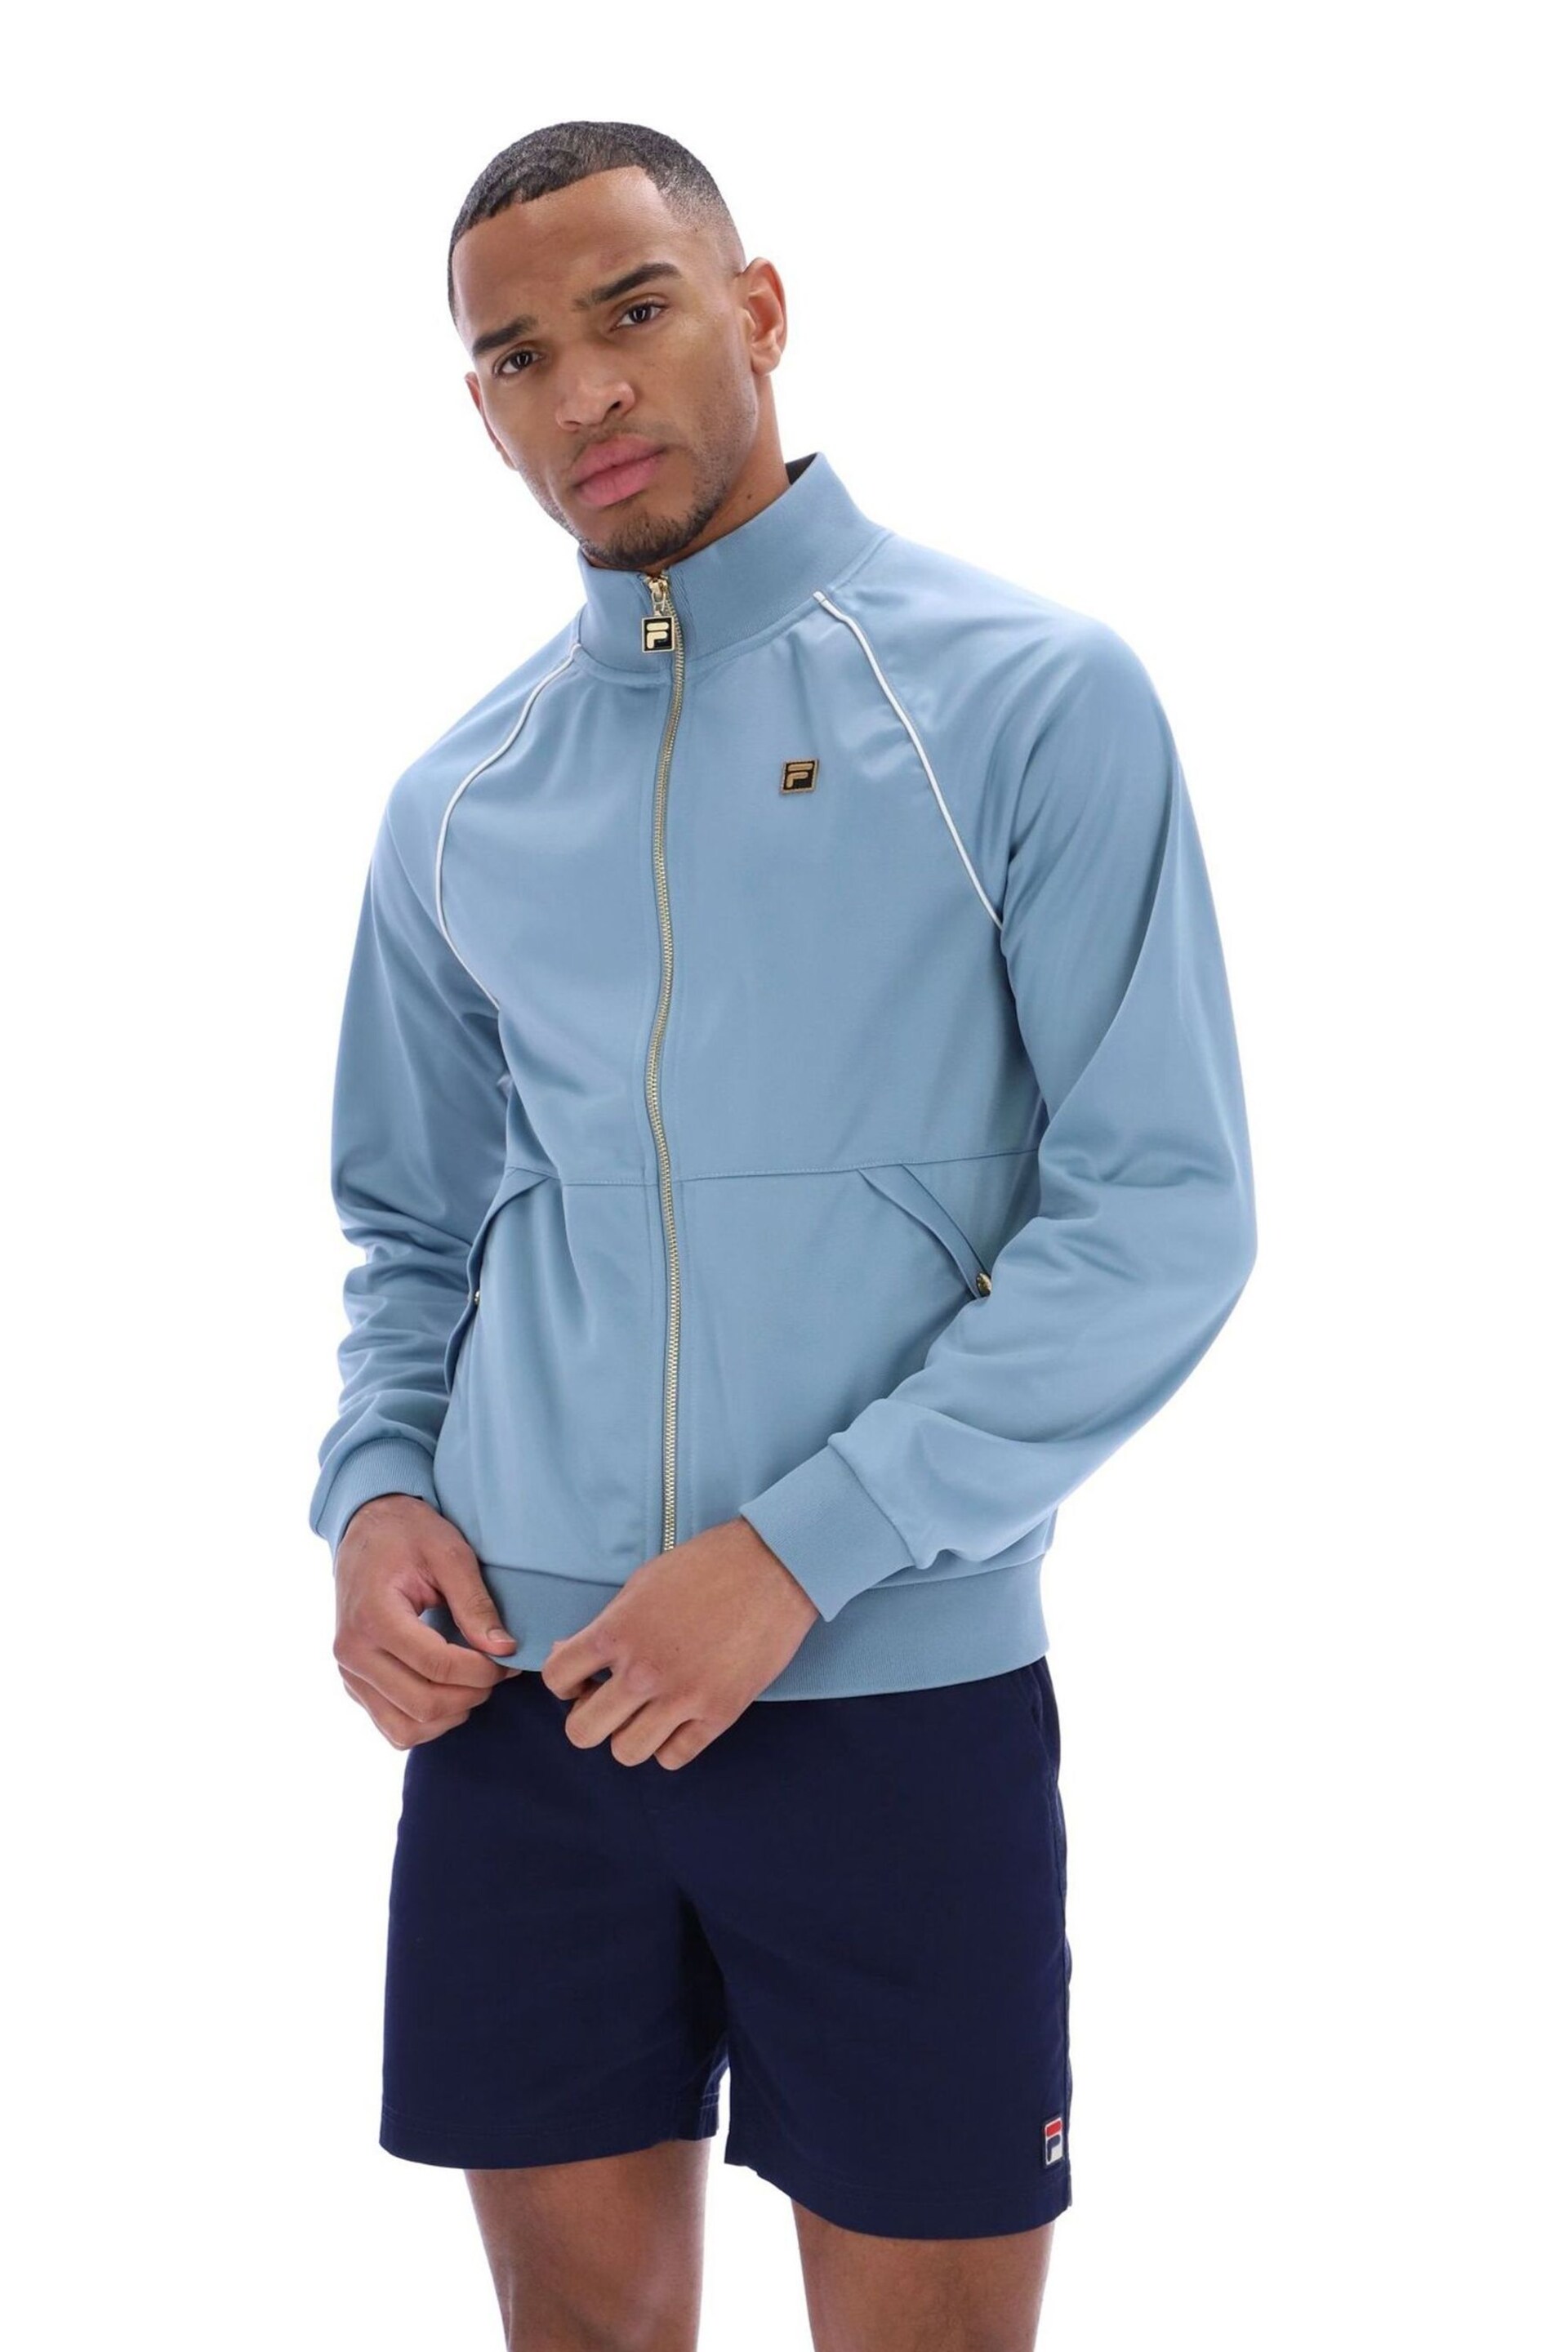 Fila Blue Tristan Track Top With Piping Detail - Image 2 of 4